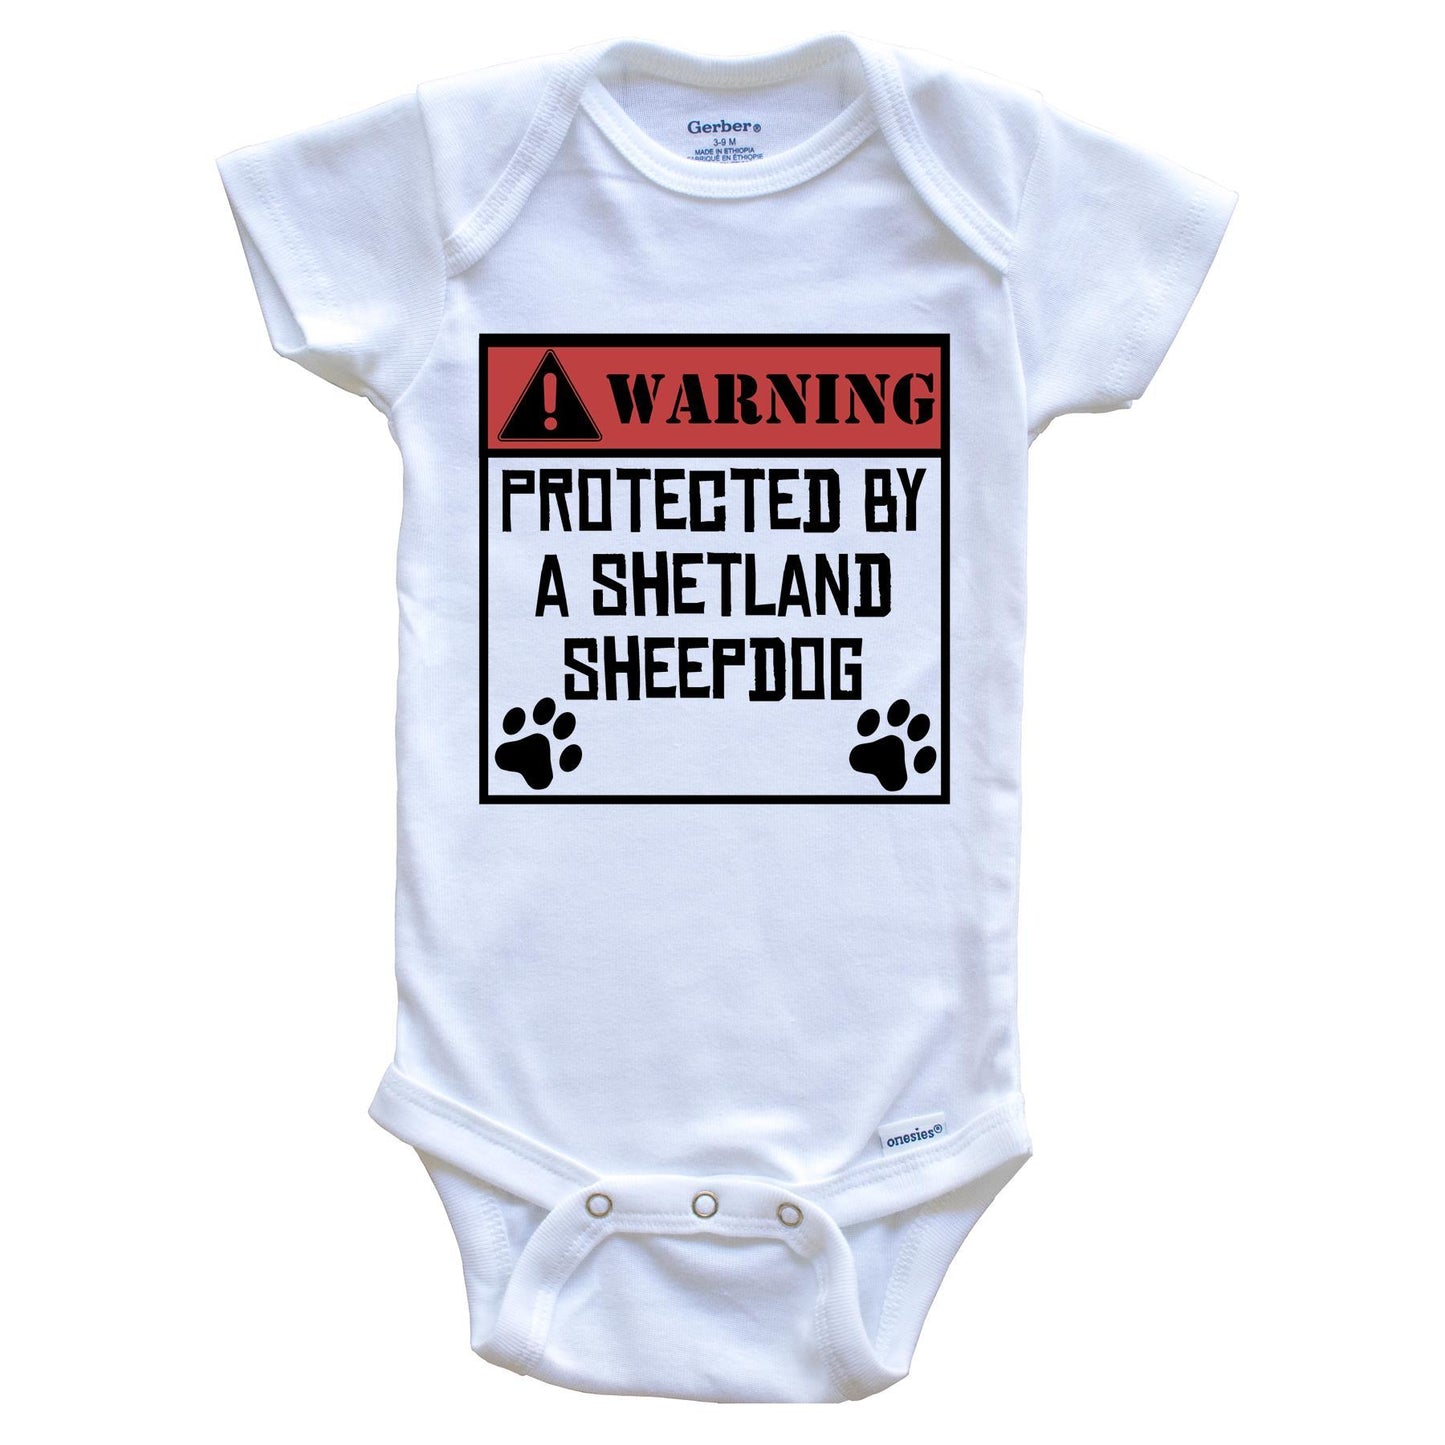 Warning Protected By A Shetland Sheepdog Funny Baby Onesie